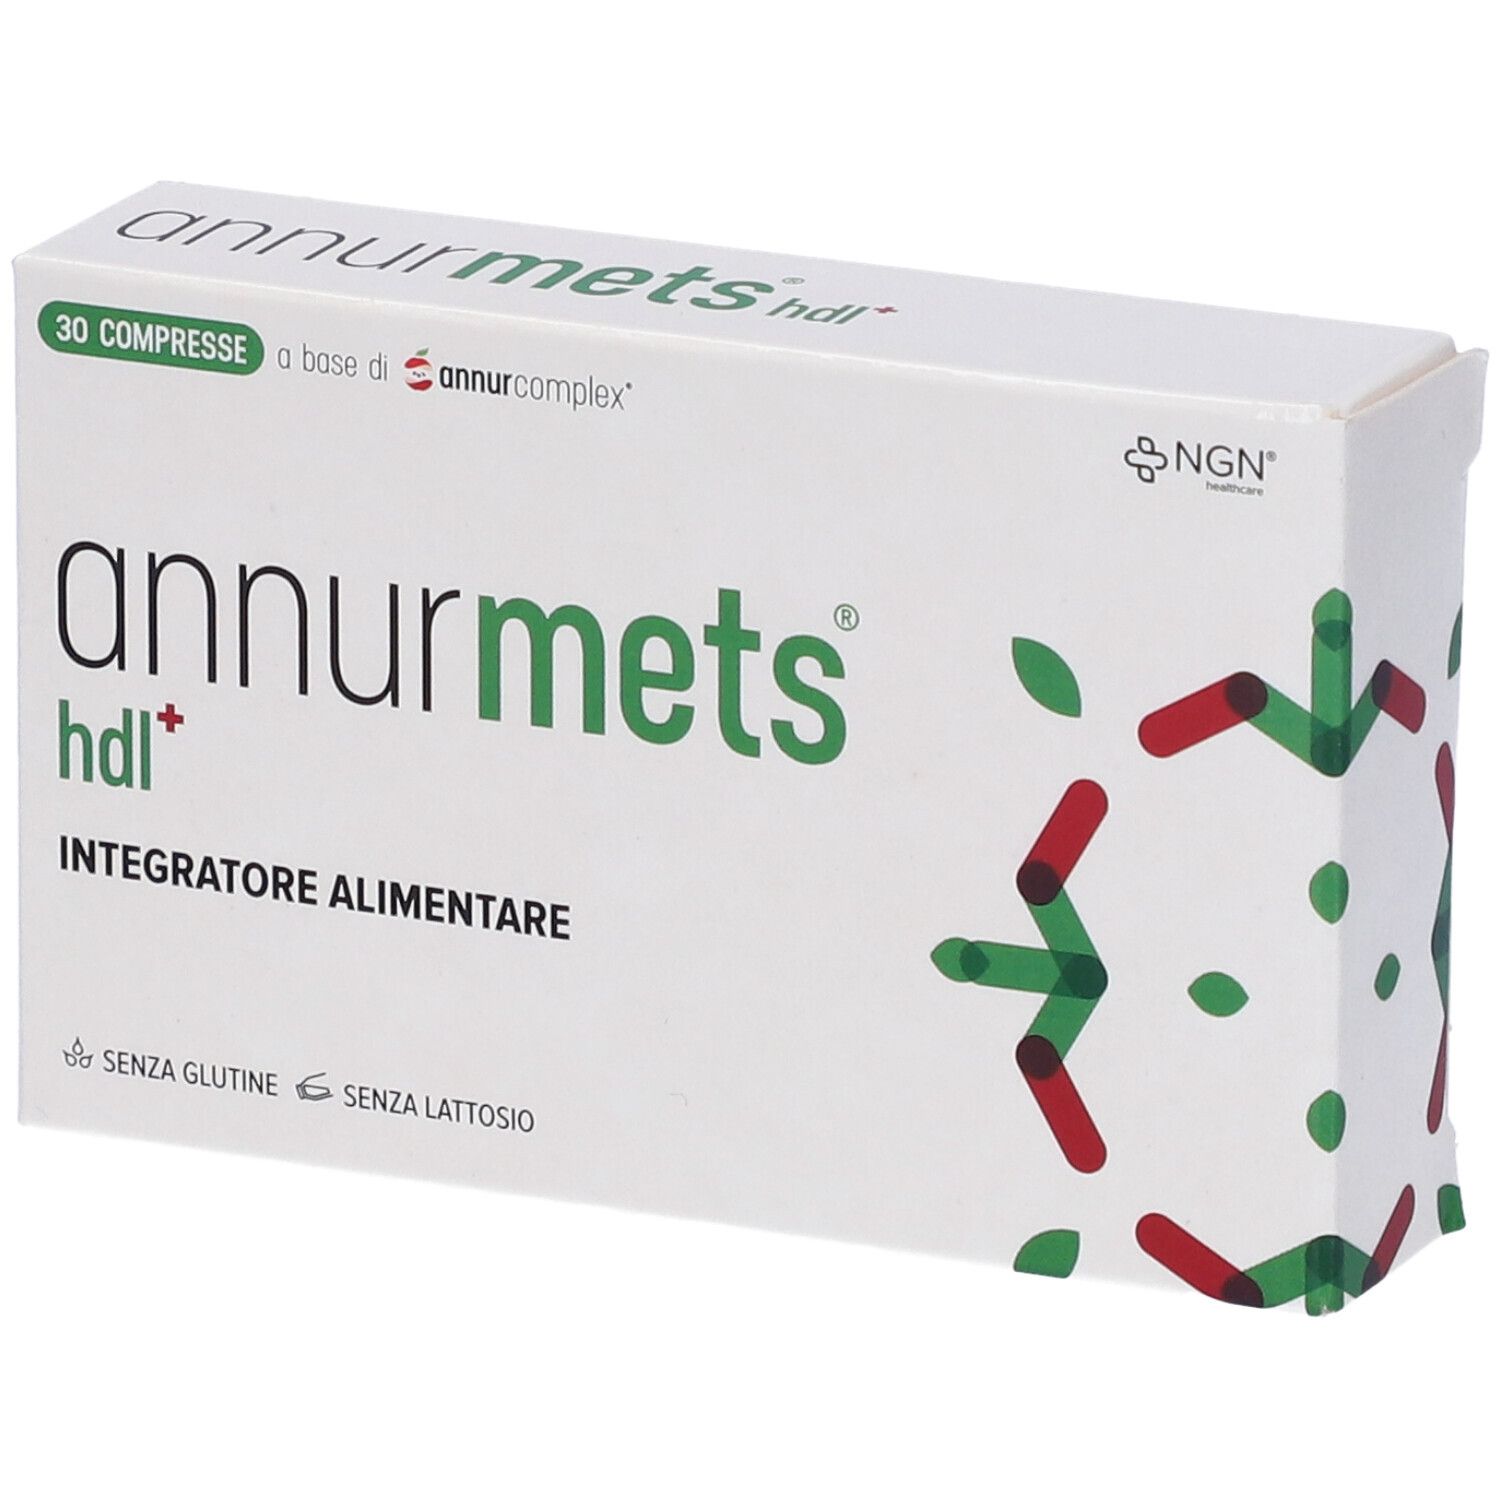 ANNURMETS HDL+